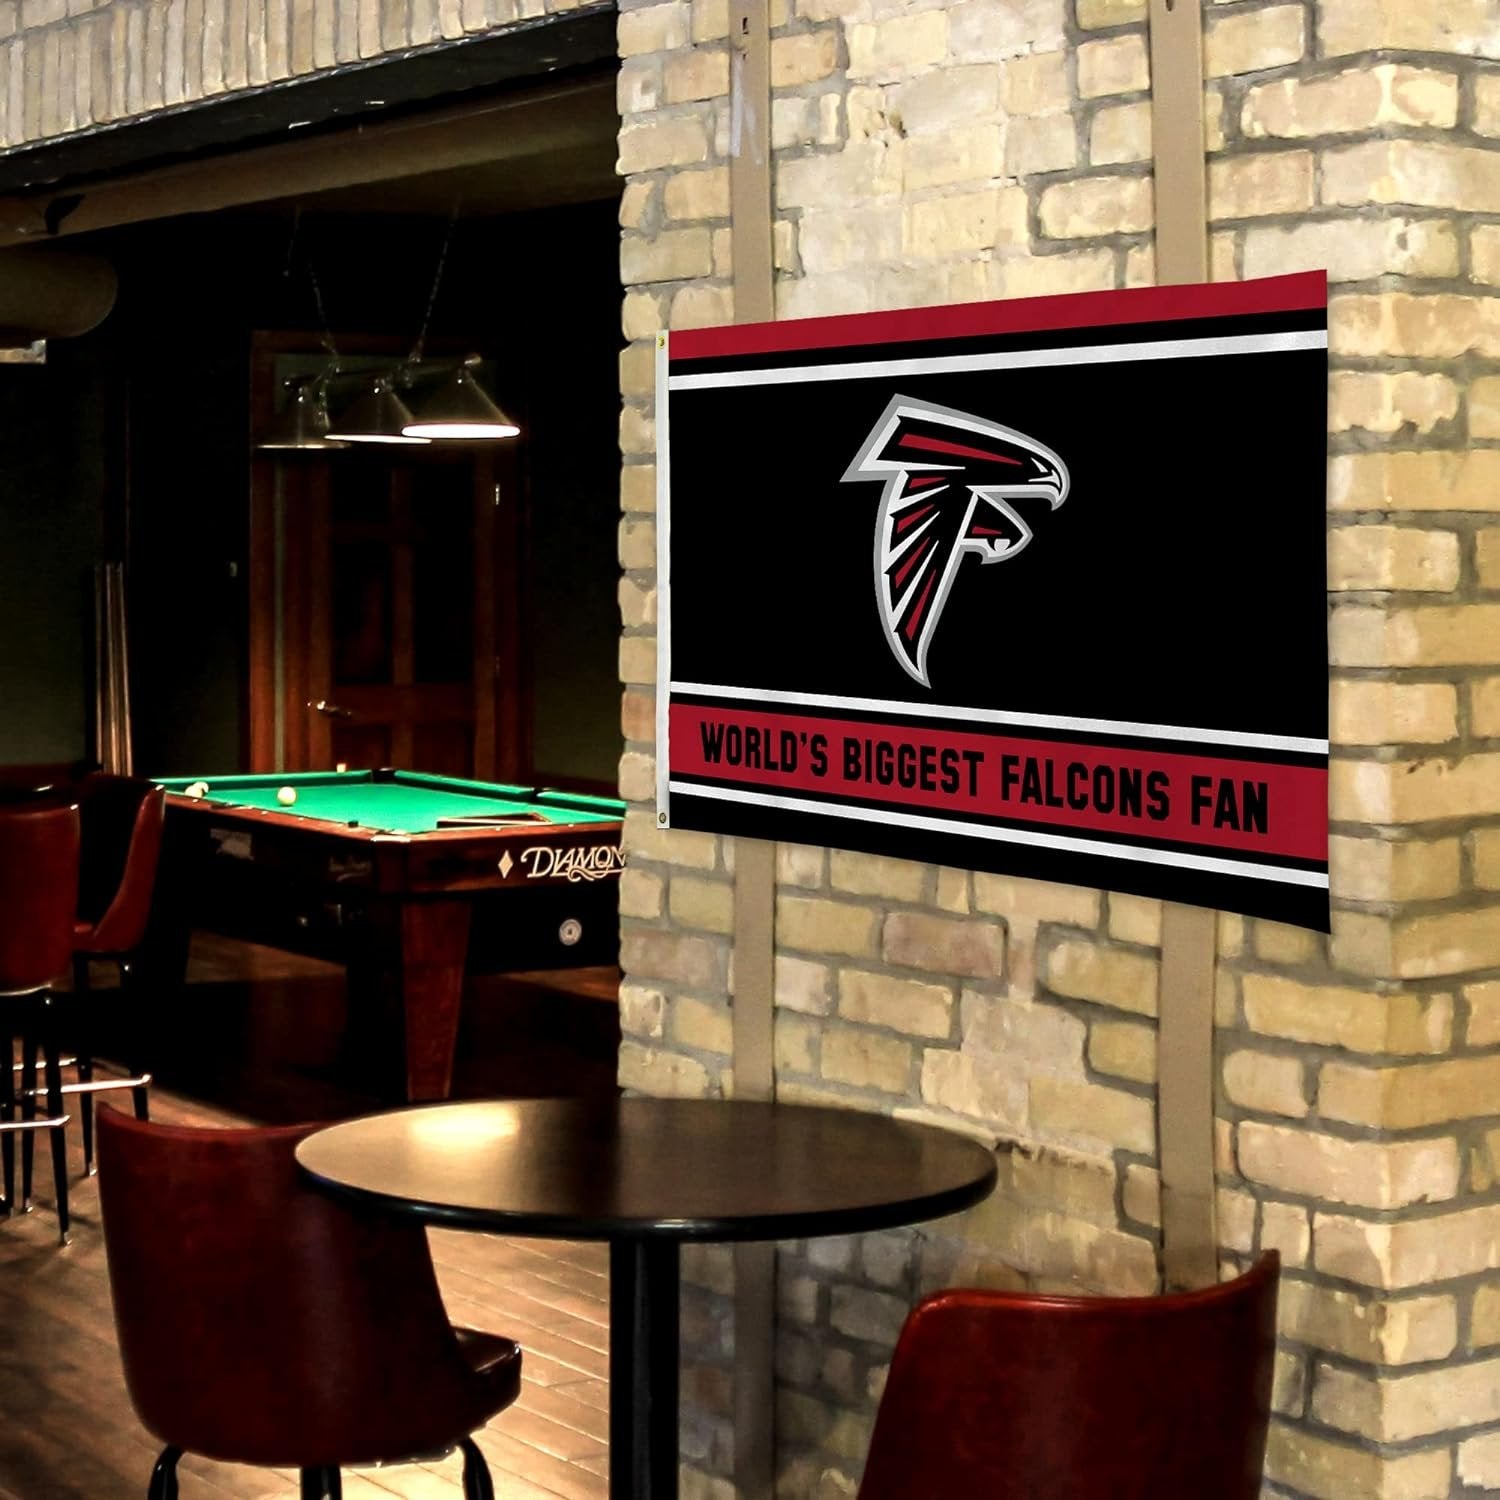 Atlanta Falcons 3x5 Feet Flag Banner, World's Biggest Fan, Metal Grommets, Single Sided, Indoor or Outdoor Use